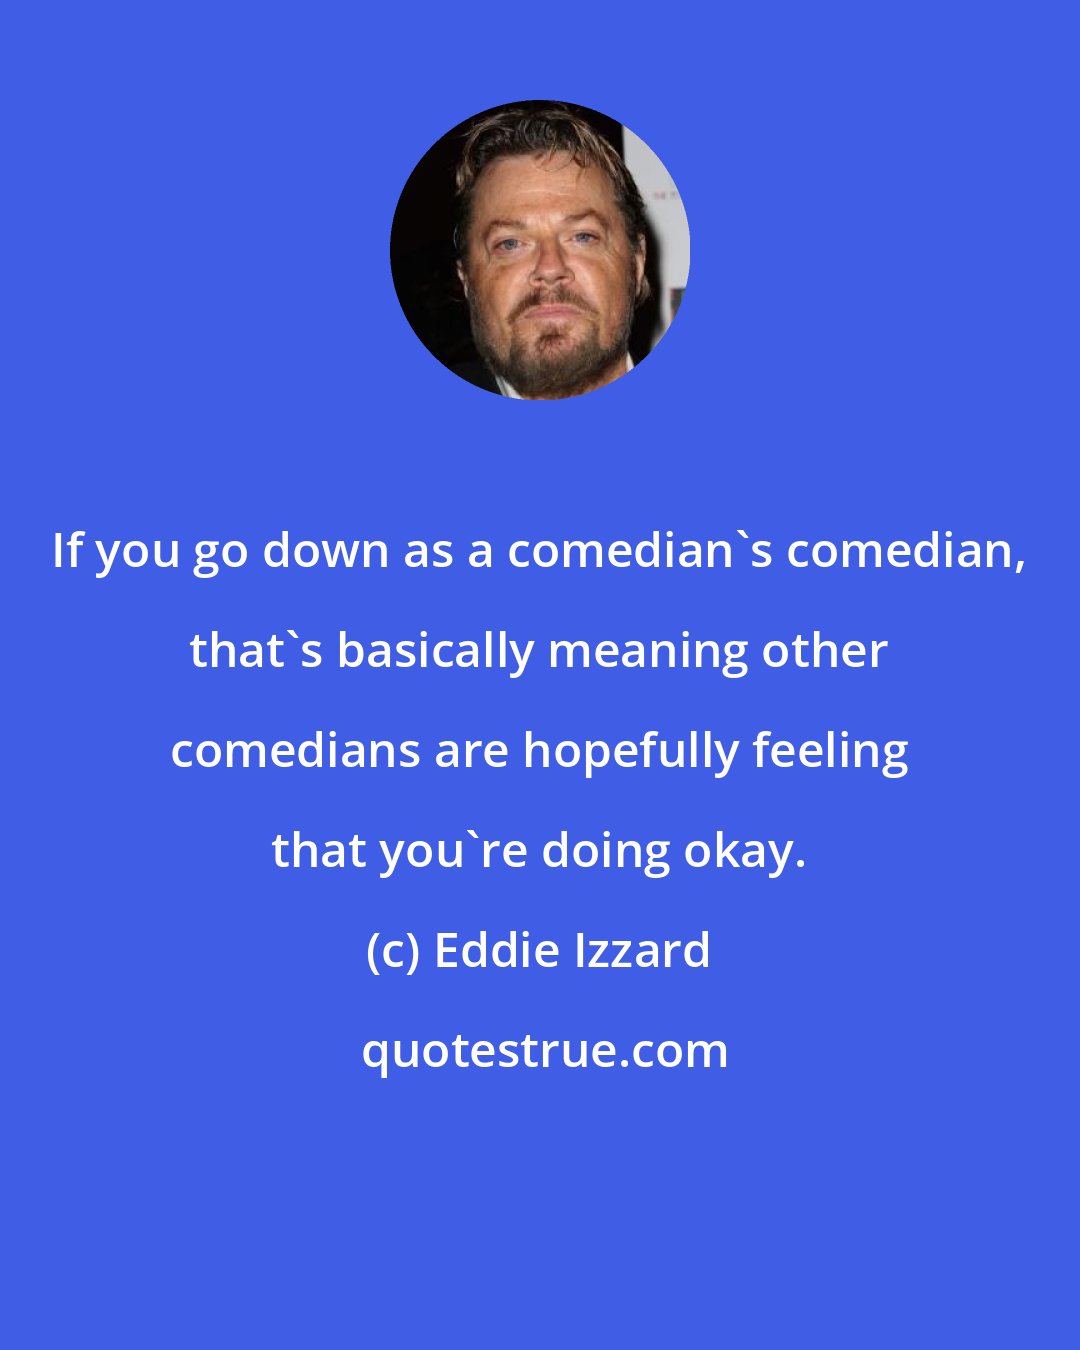 Eddie Izzard: If you go down as a comedian's comedian, that's basically meaning other comedians are hopefully feeling that you're doing okay.